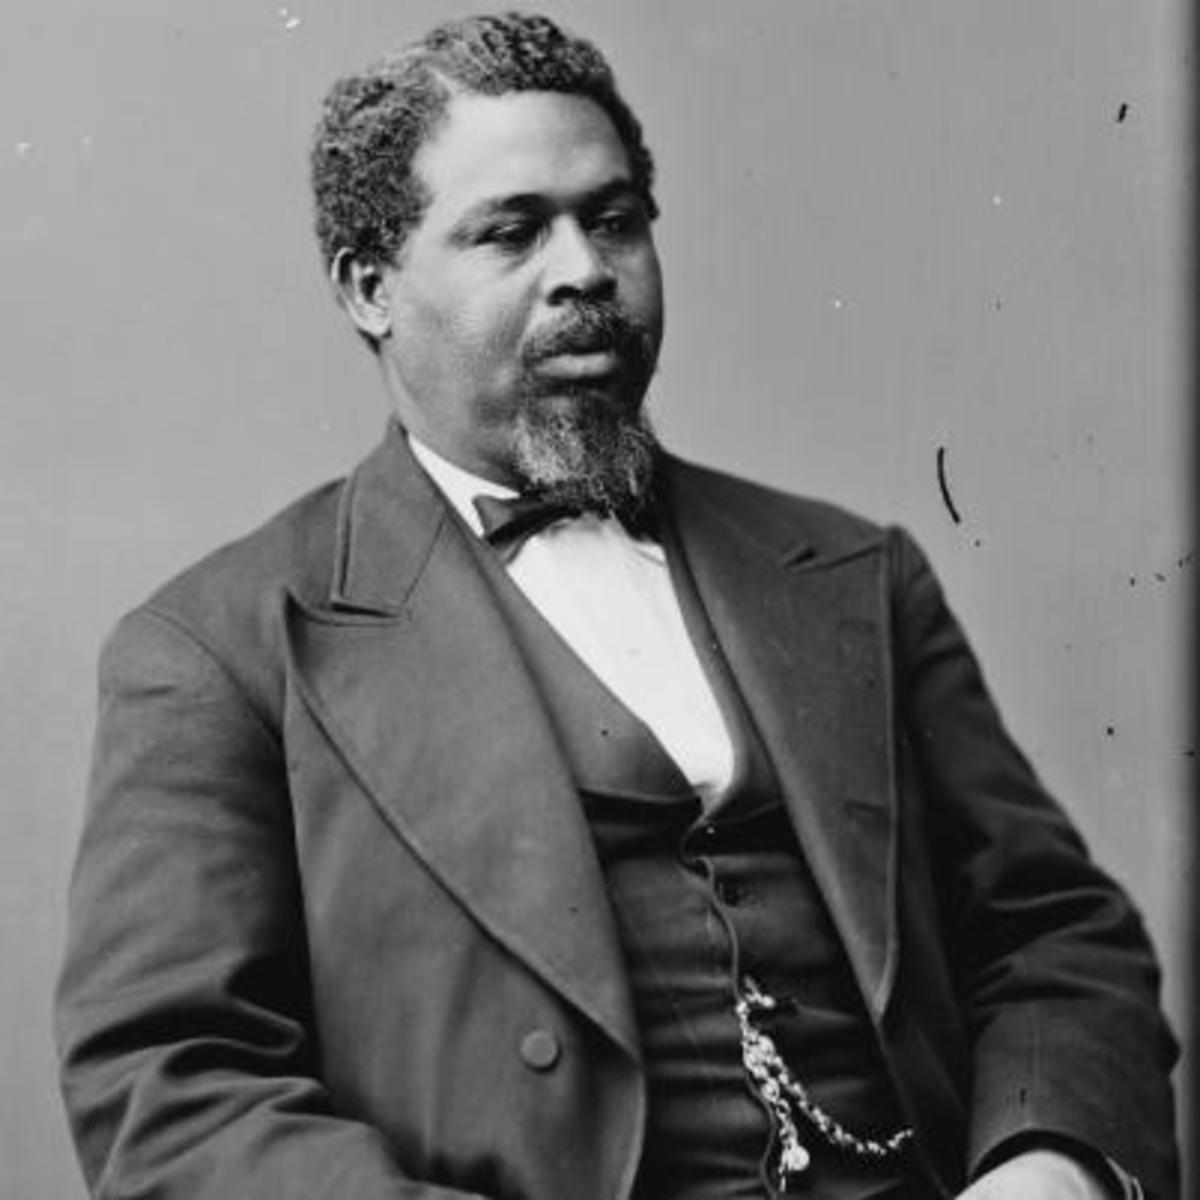 14/ But Robert Smalls didn't stop there.In 1868, he was elected to the South Carolina House of Representatives.In 1874, he was elected to the United States House of Representatives.Robert Smalls had been born into slavery. 35 years later, he was a United States congressman.